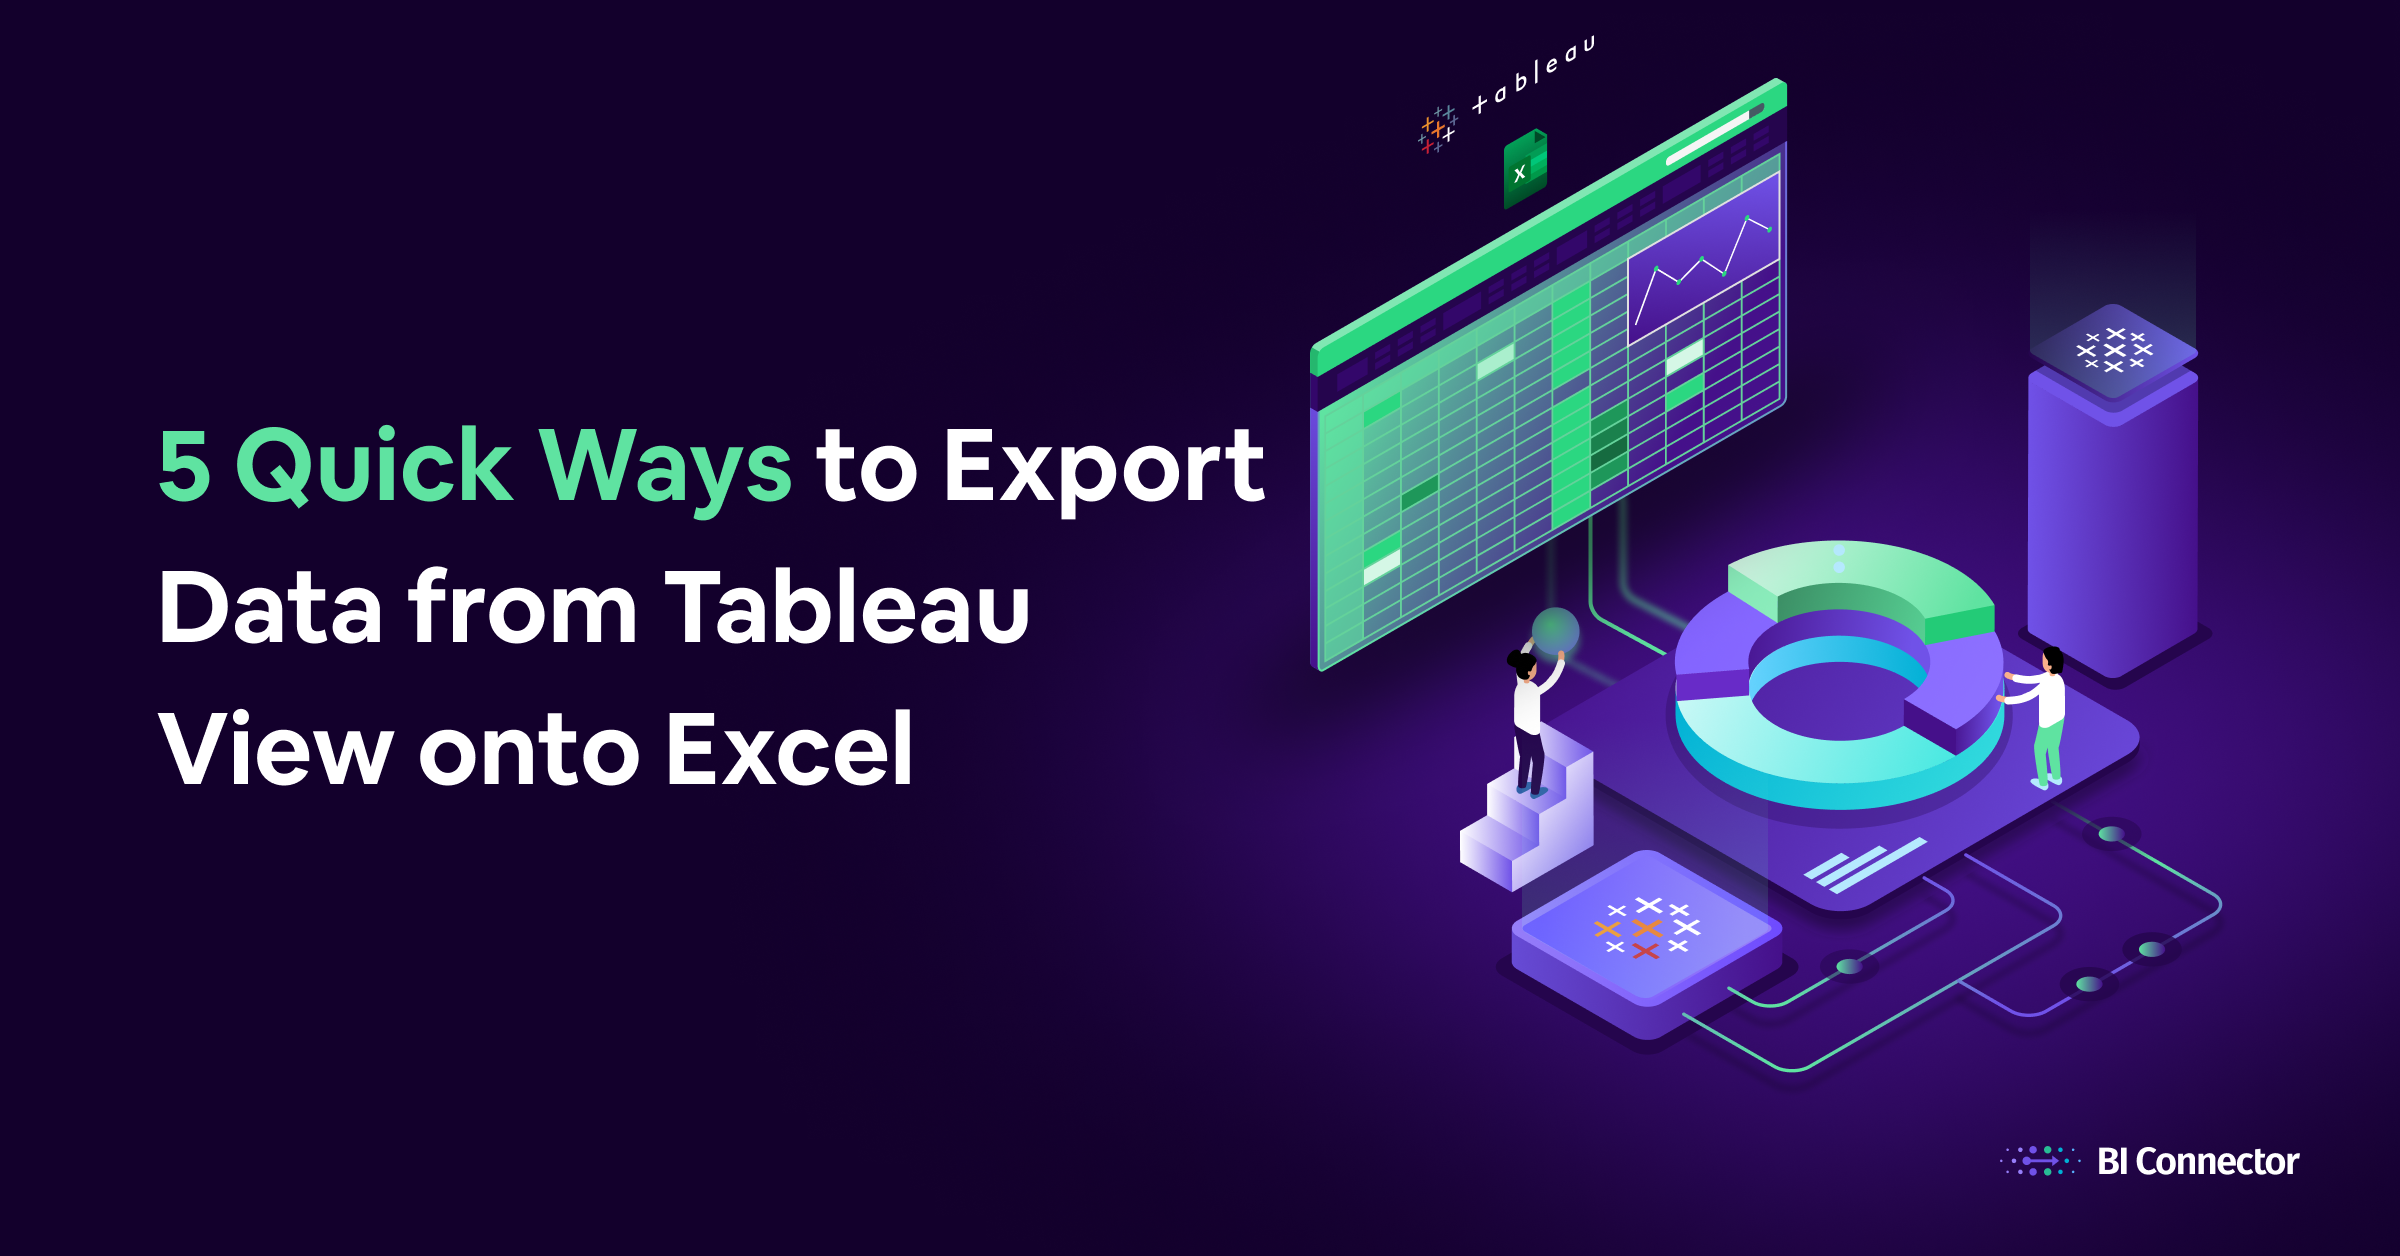 5_quick_ways_to_export_data_from_Tableau_view_onto_excel